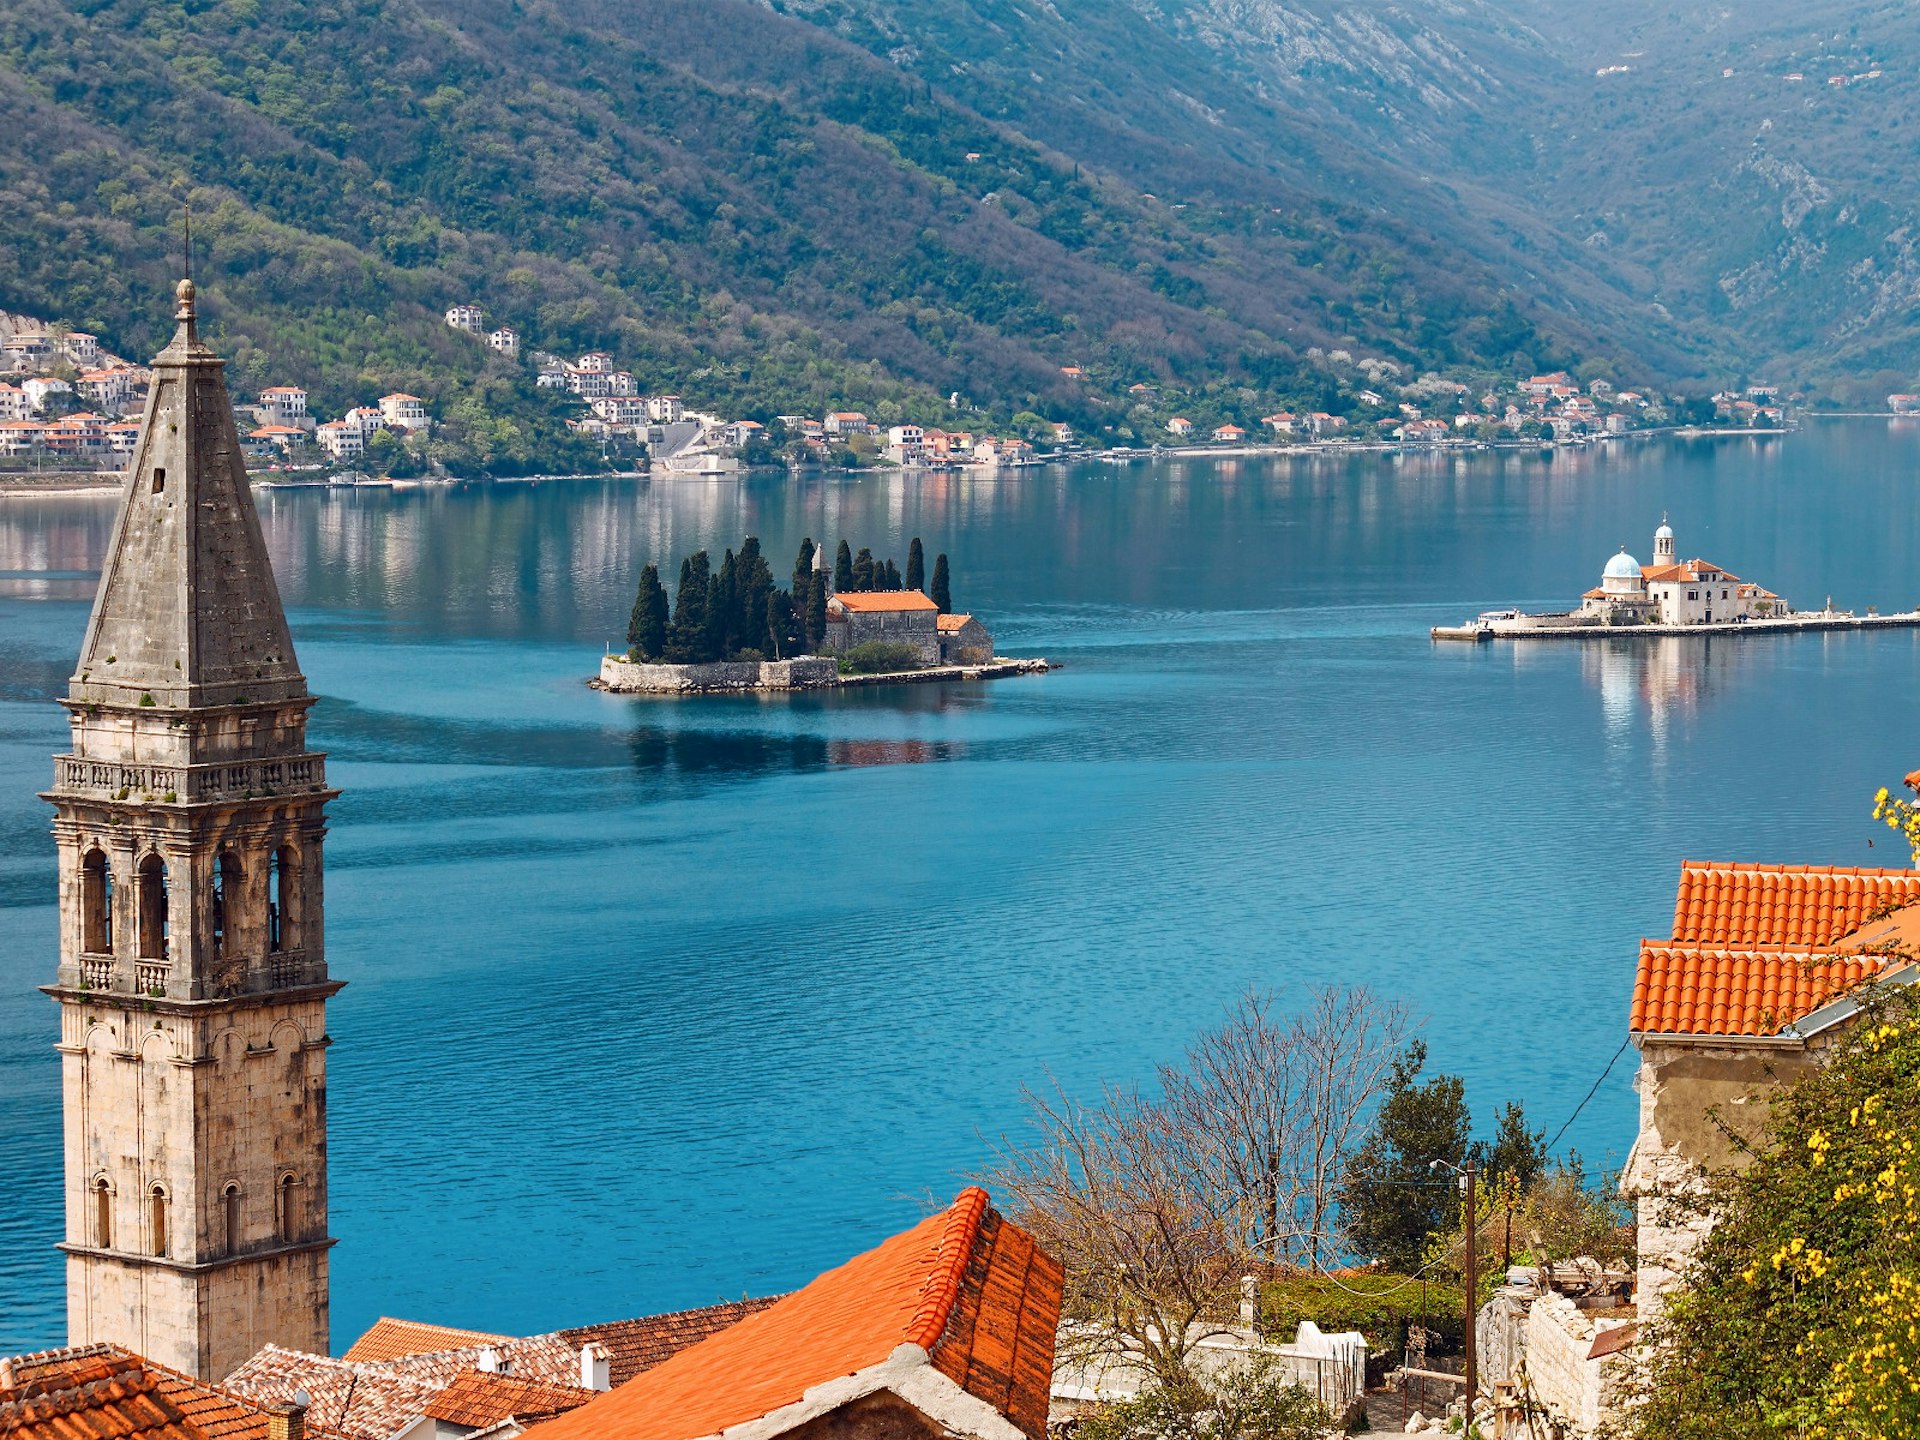 Perast has just a sliver of beach, but the views of the Bay of Kotor are spectacular © irakite / Shutterstock